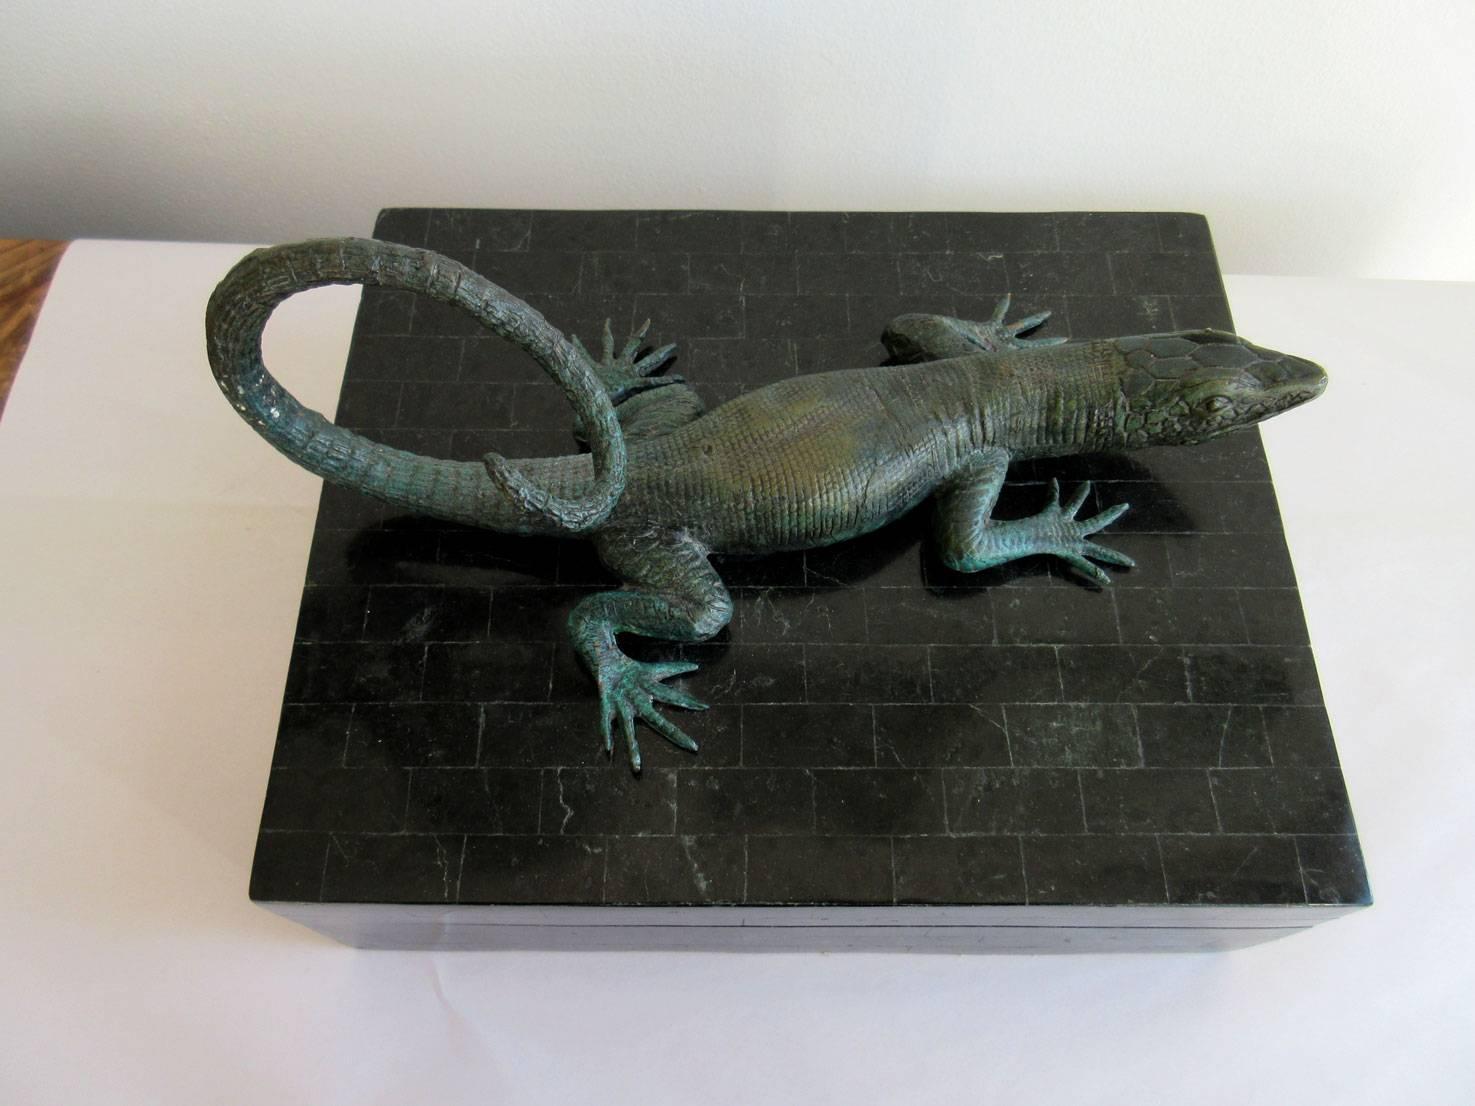 Vintage black stone box with wonderfully detailed lizard atop lid.